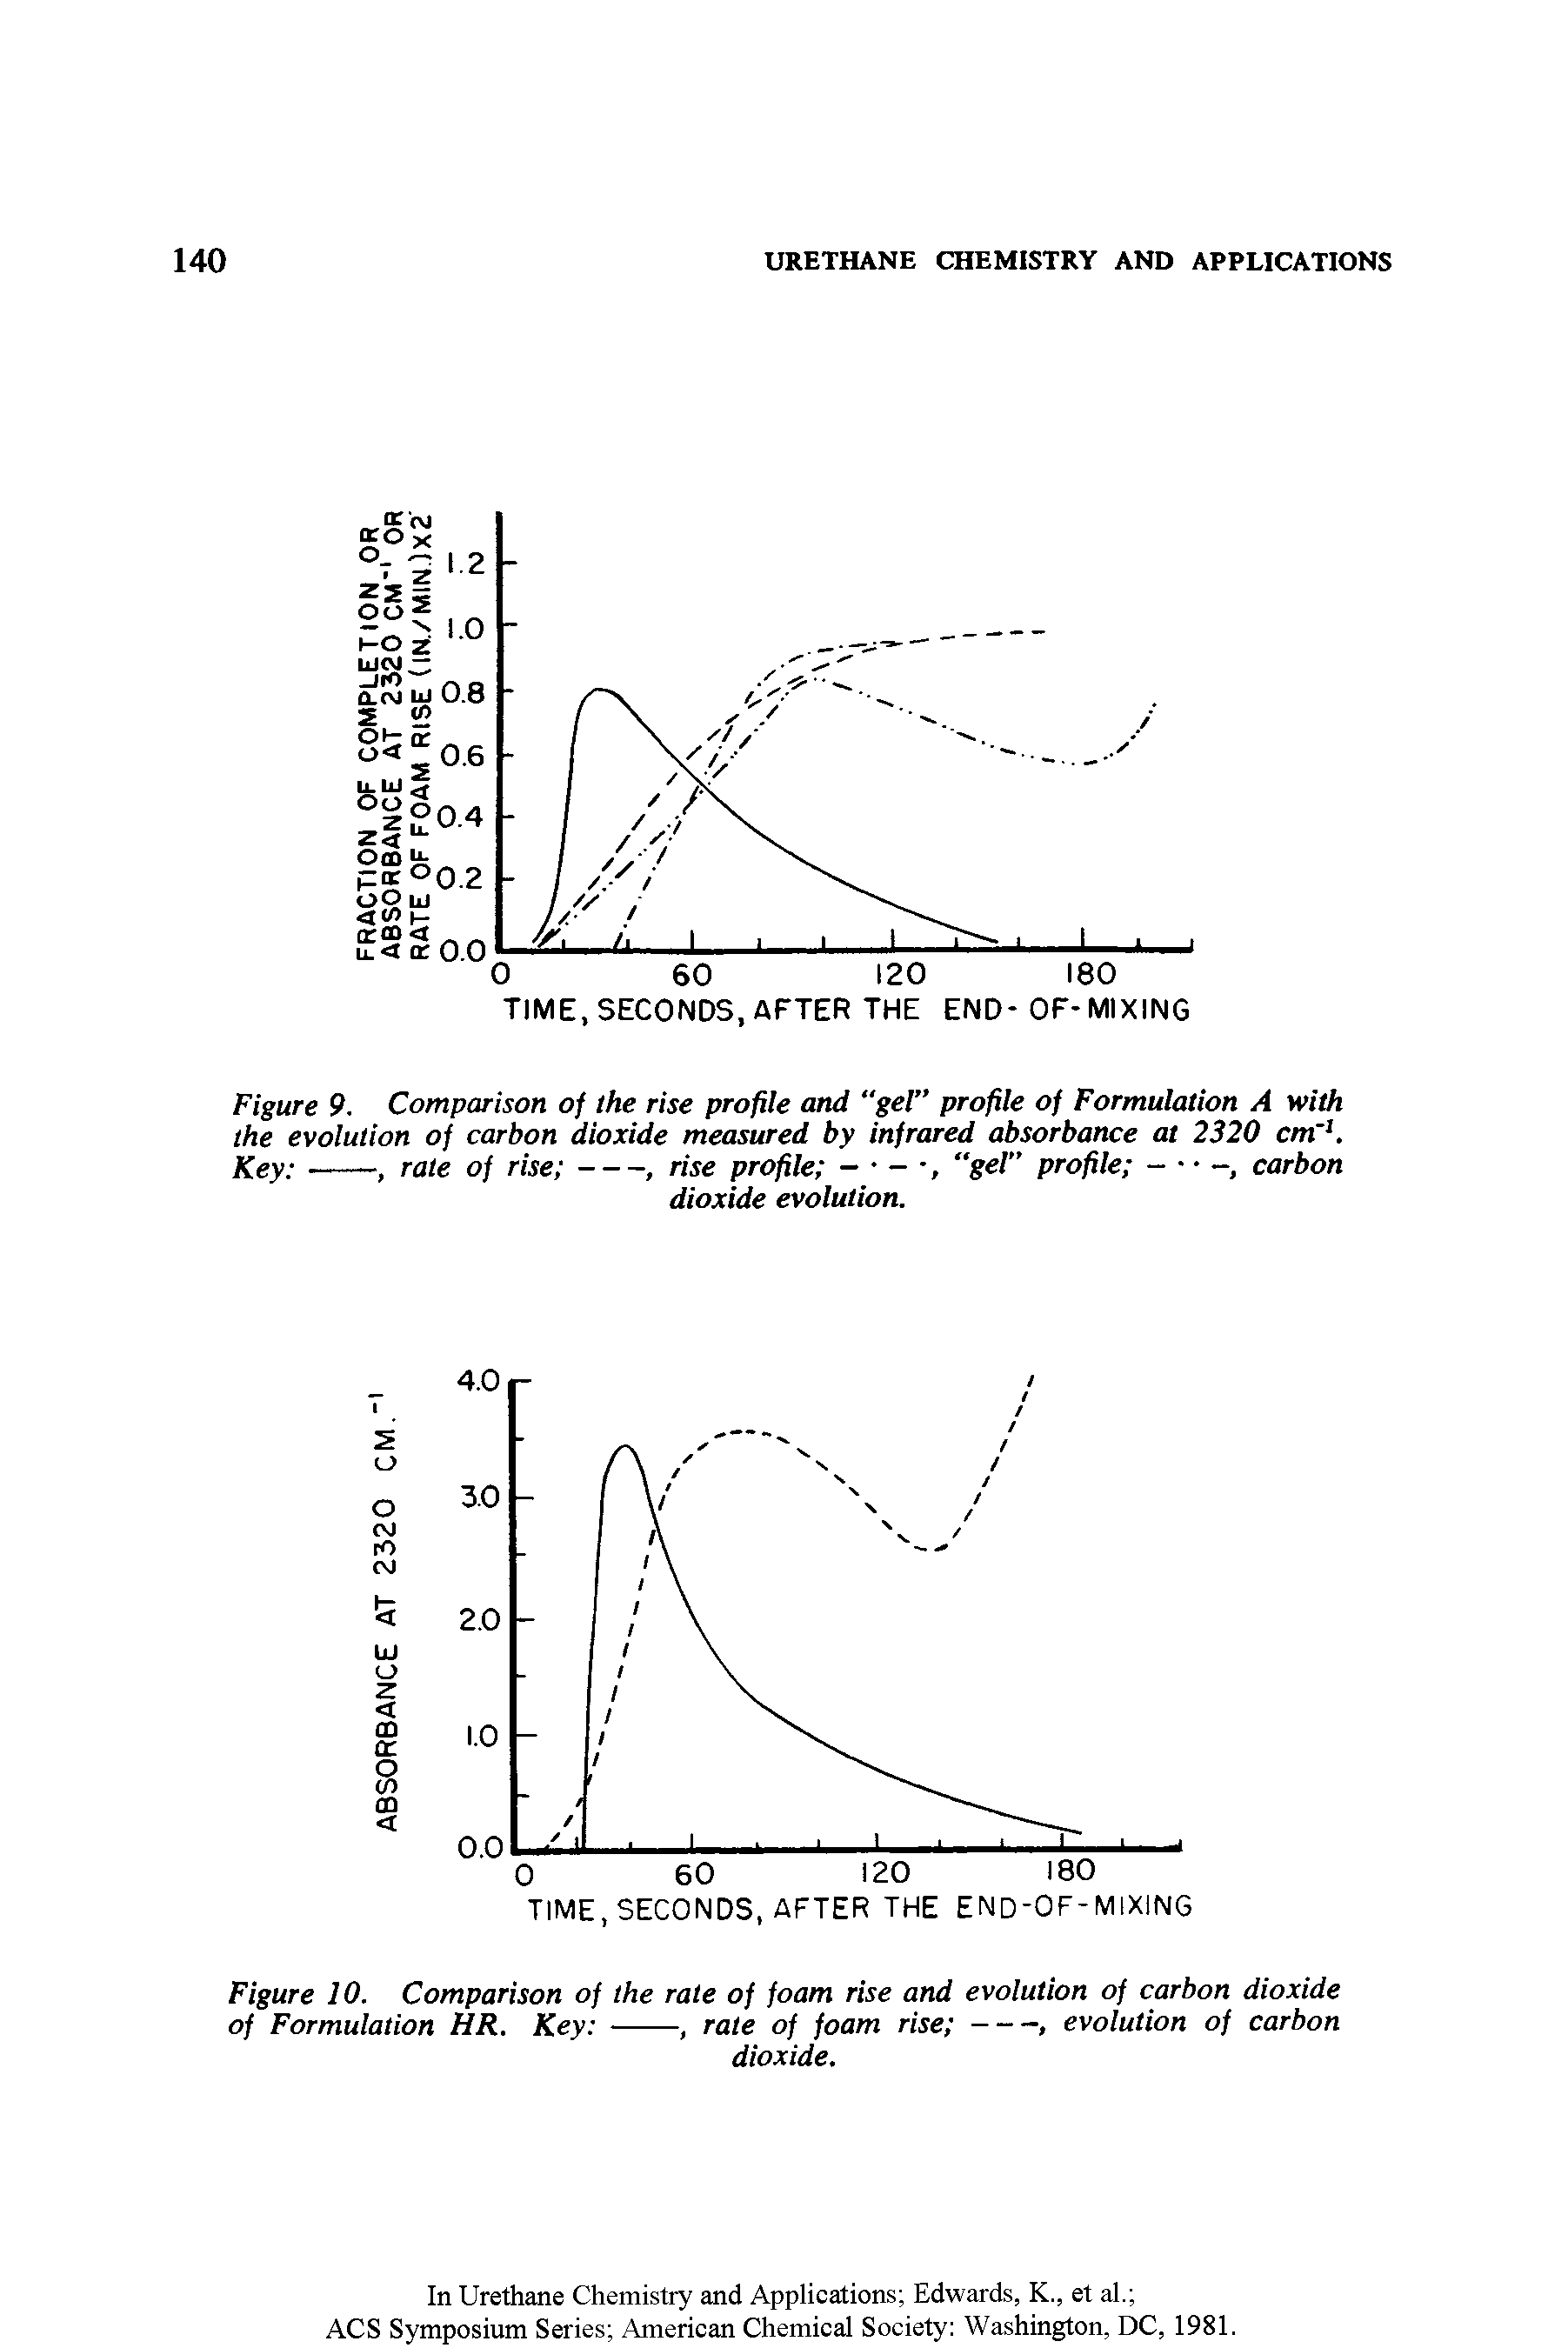 Figure 10. Comparison of the rate of foam rise and evolution of carbon dioxide...